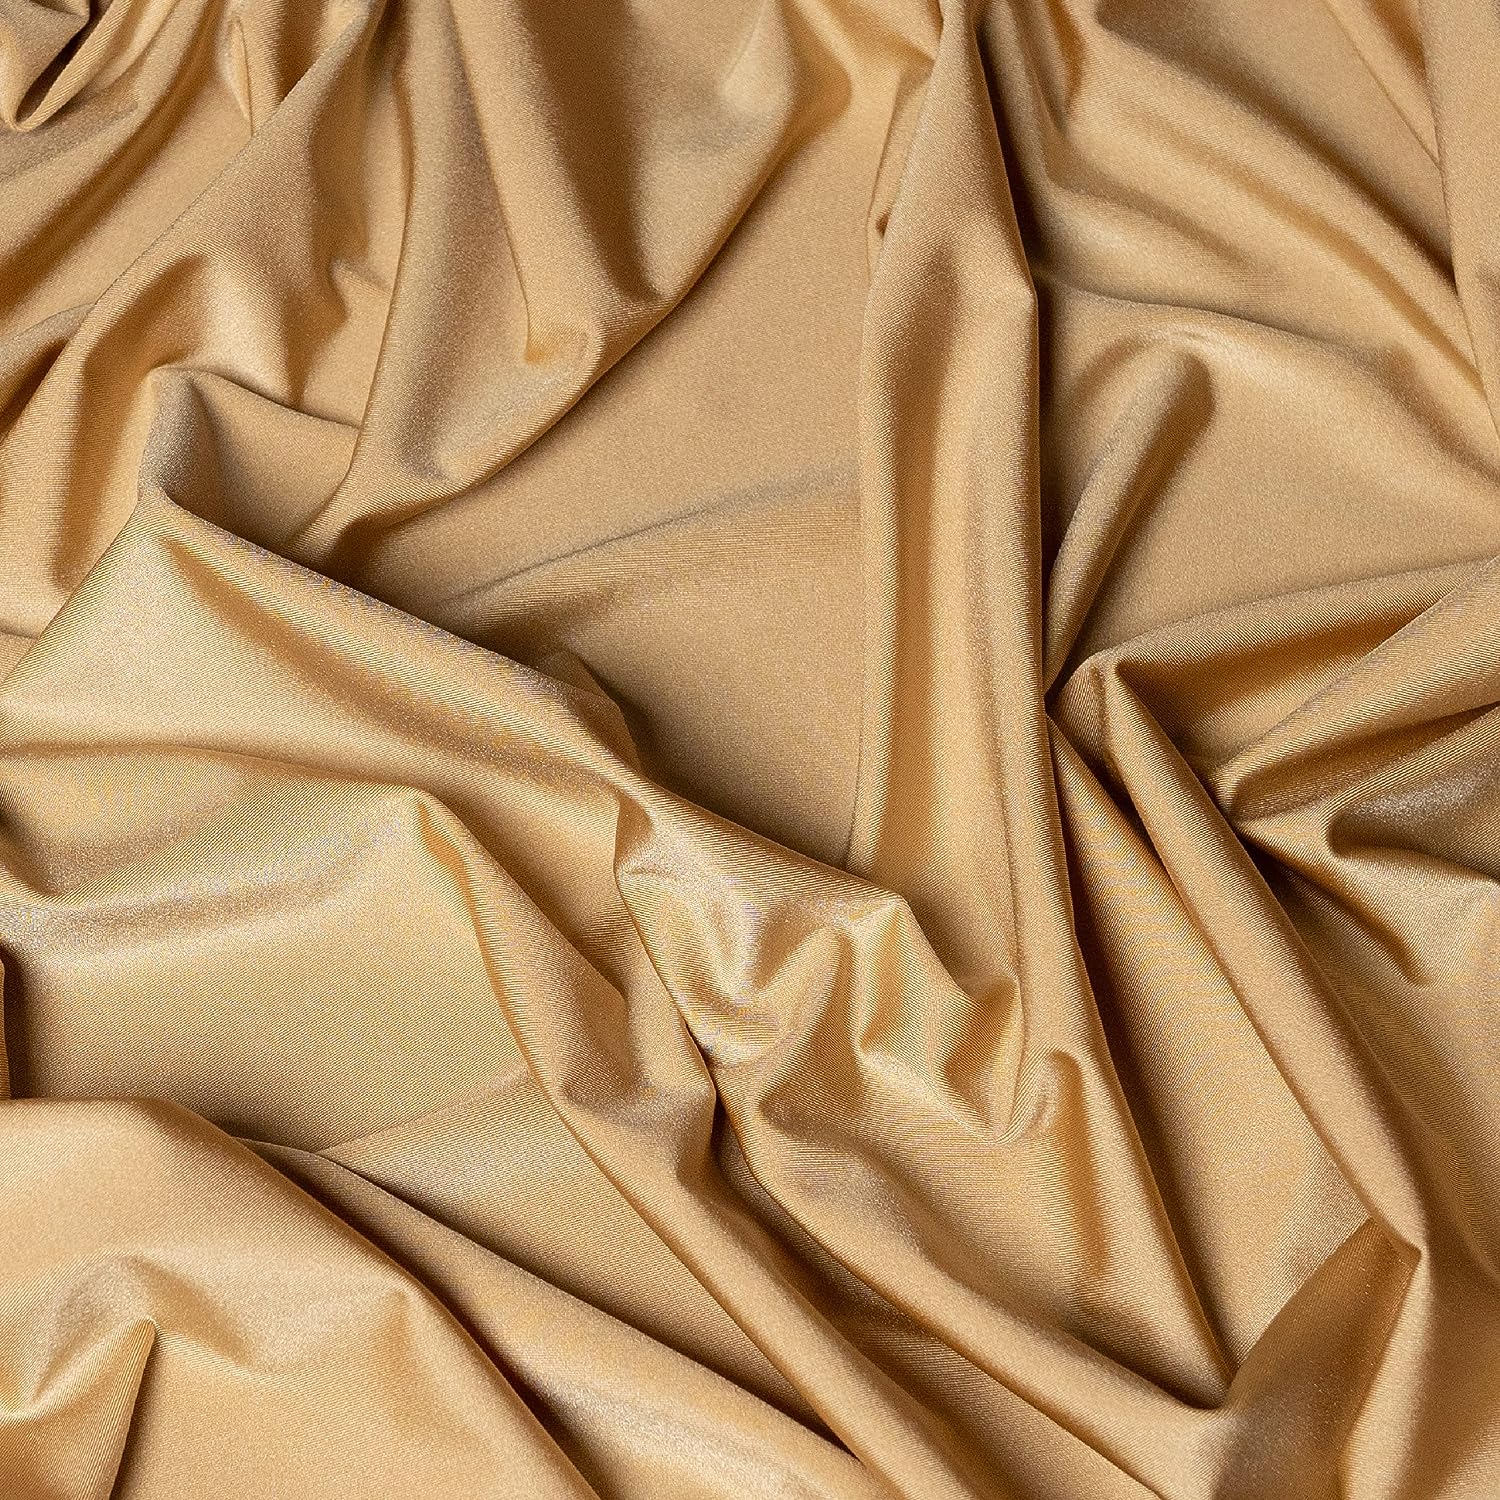  Lycra Matte Milliskin Nylon Spandex Fabric 4 Way Stretch 58  Wide Sold by The Yard Many Colors (Nude)